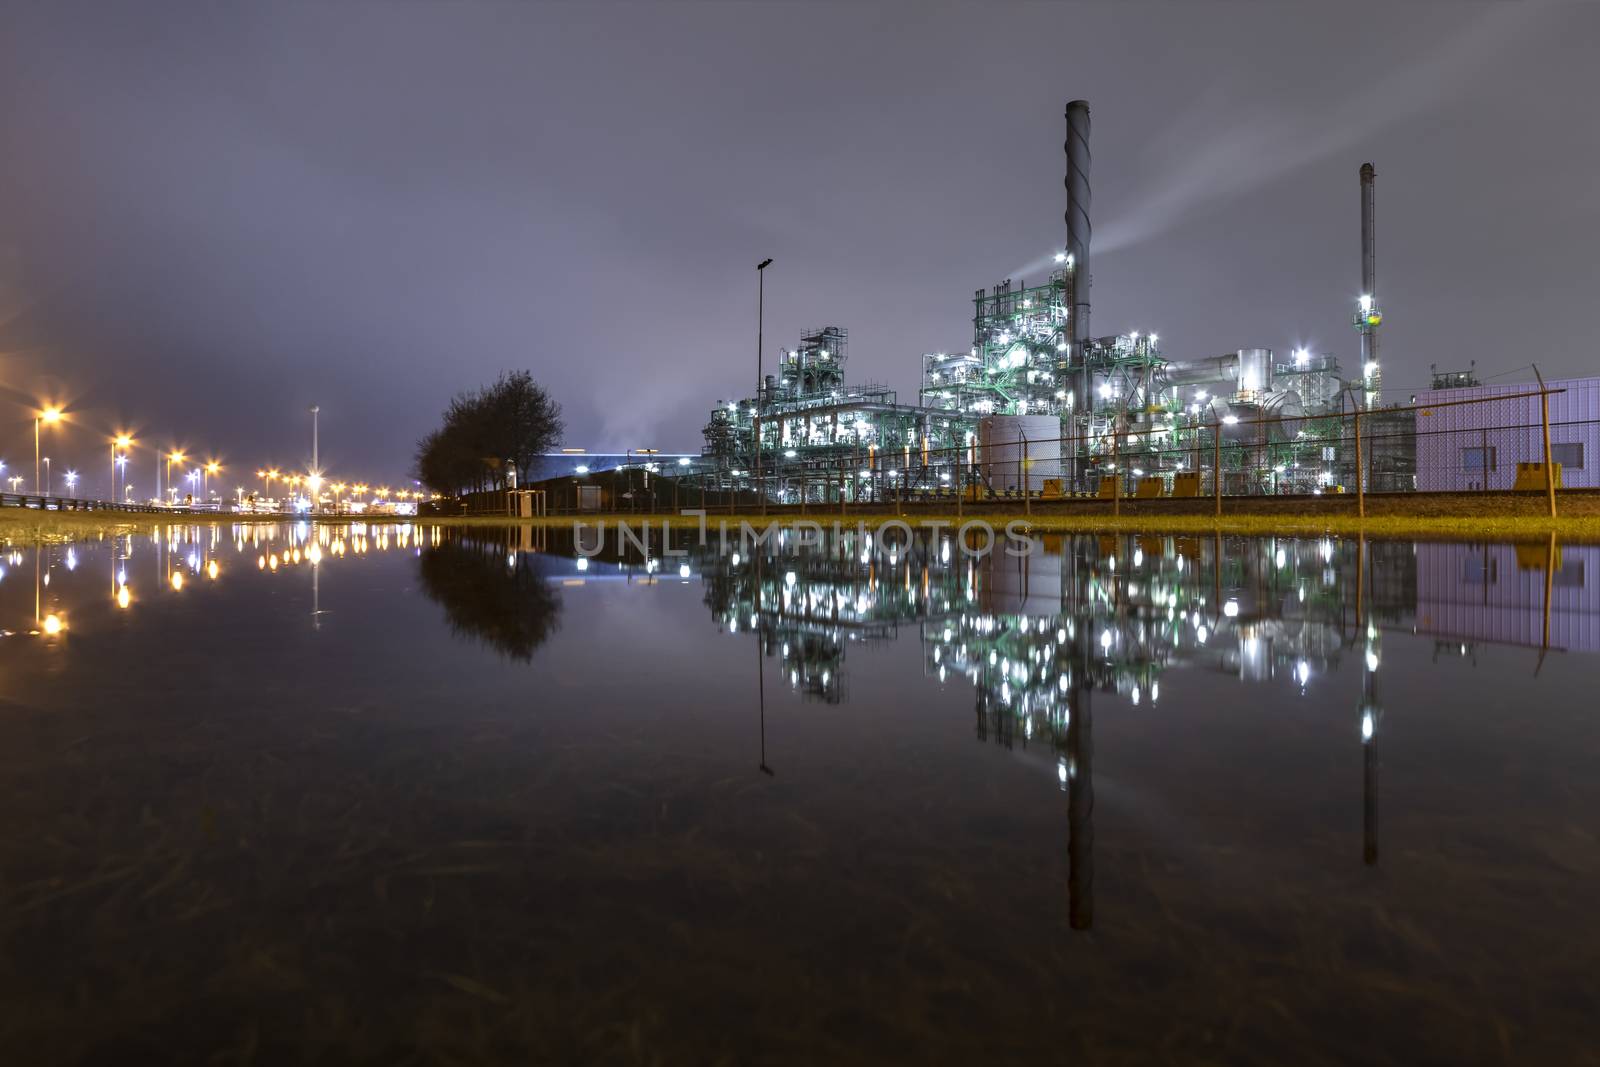 Reflection of the panorama of a refinery and its chimney during the sunset blue hour moment at Rotterdam, Netherlands by ankorlight